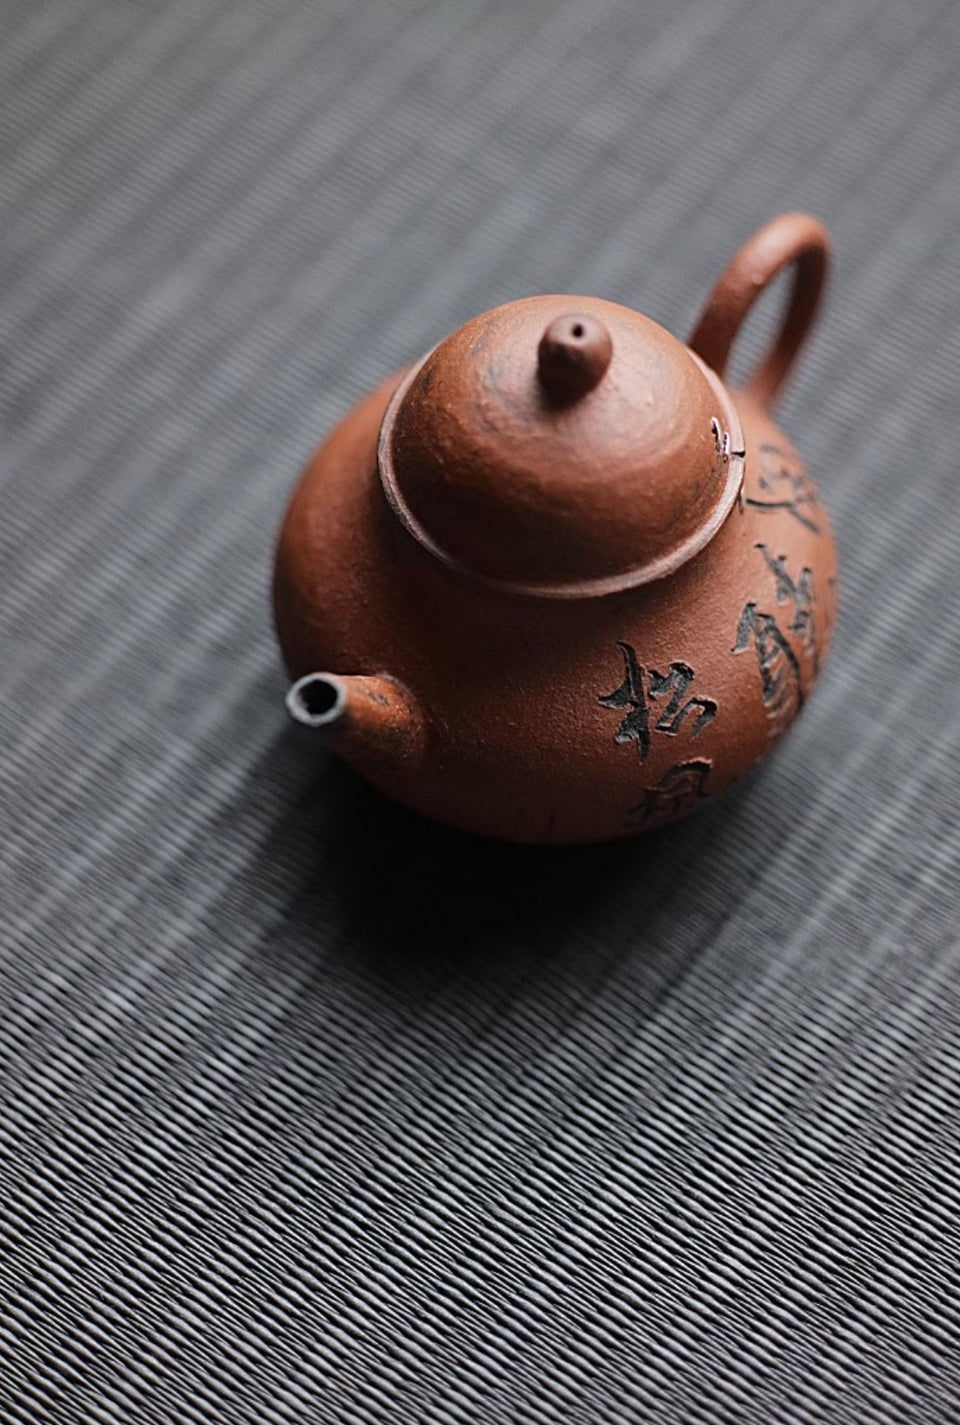 Limited Edition Huishan Red, Copper, & Calligraphy Teapot #4 by Cheng Wei